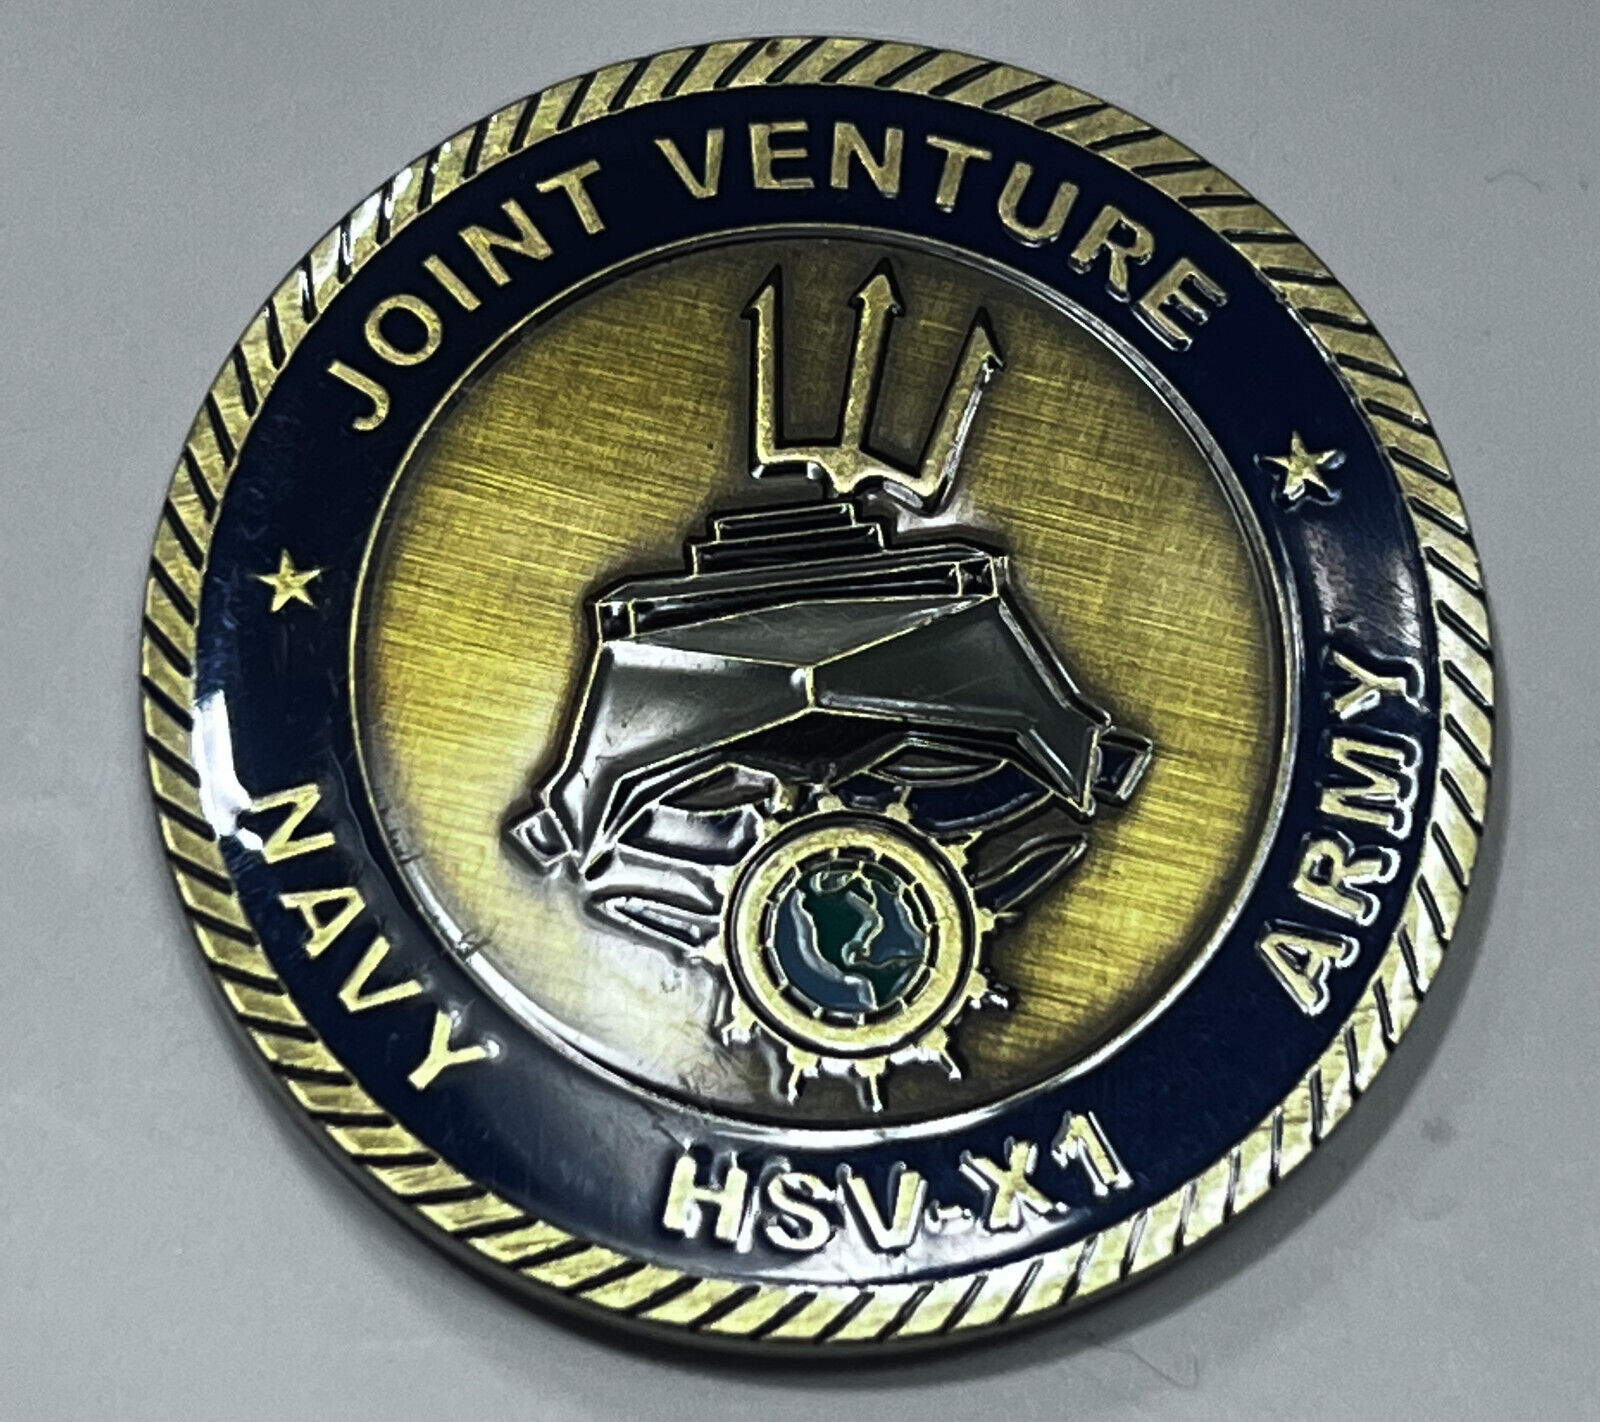 rare authentic 1998 challenge coin w/coa joint venture army navy hsv-x1 project